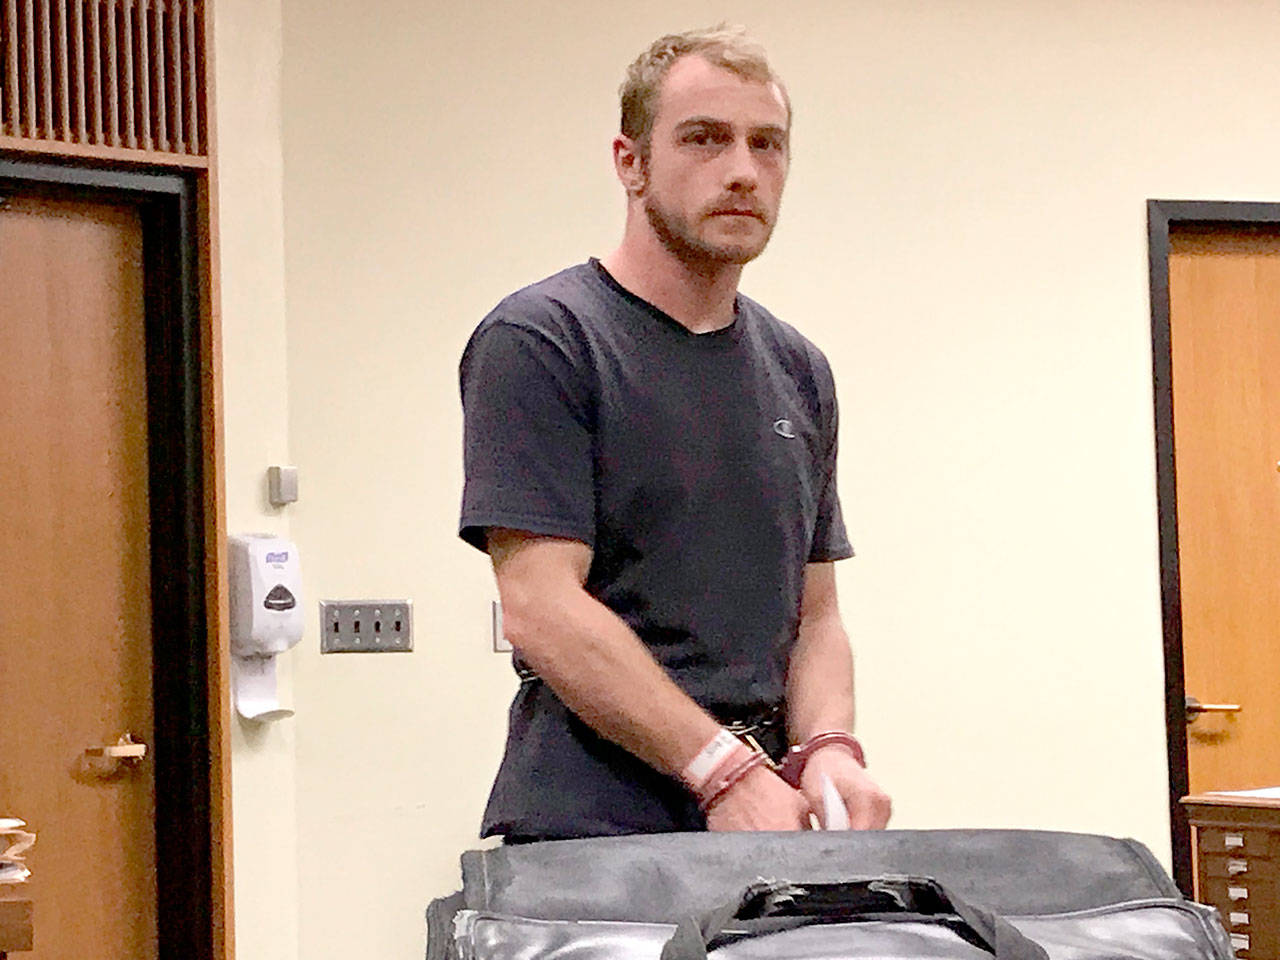 Accused rapist Nikolas Clark arrived for his first appearance last week in Clallam County Superior Court. (Paul Gottlieb/Peninsula Daily News)